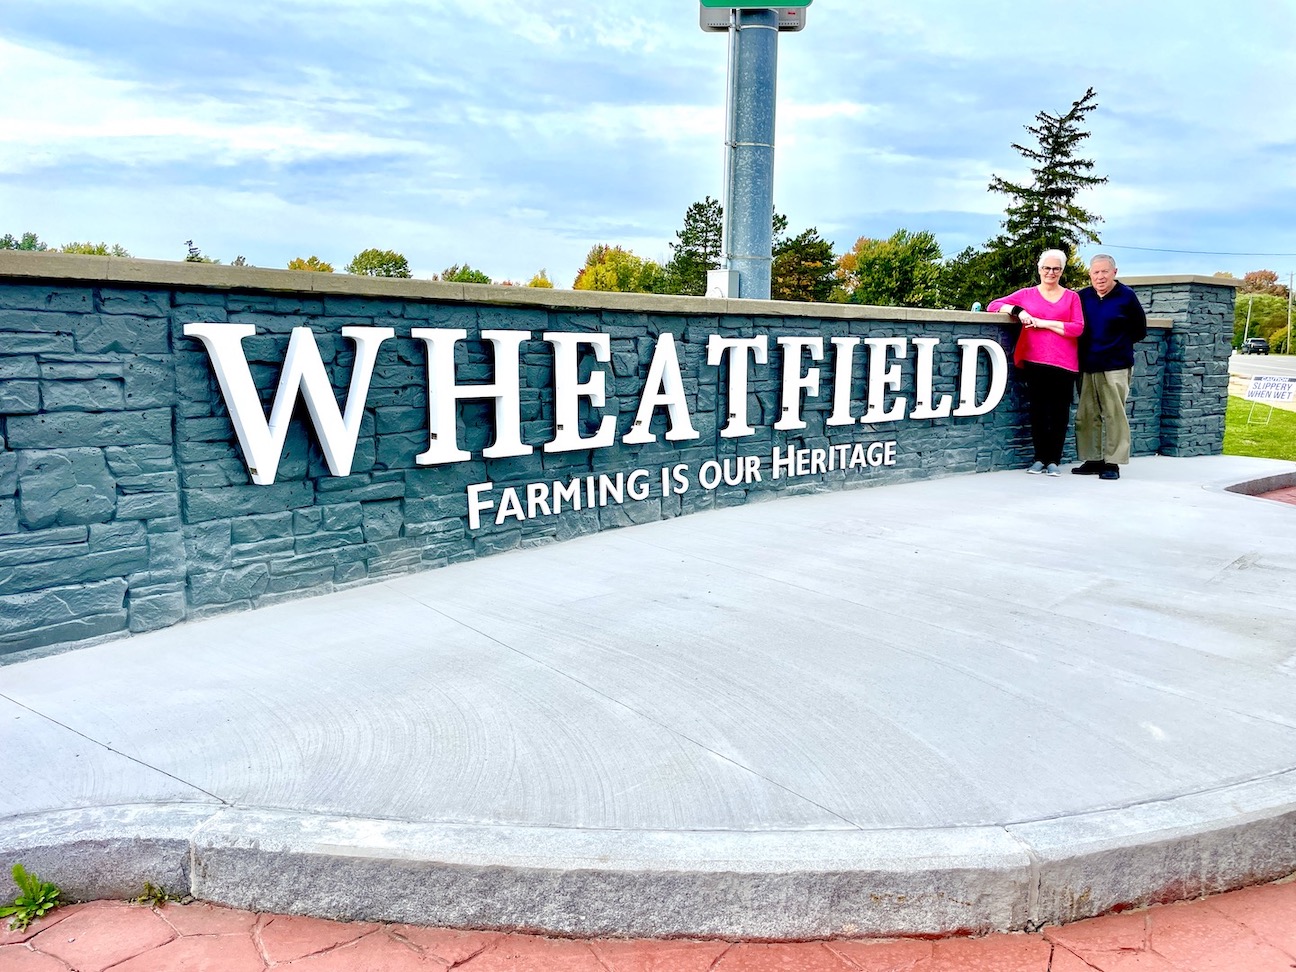 Wheatfield welcome: Rita and Tom Kontak of the Wheatfield Enhancement Volunteers stand by the Wheatfield wall at Nash Road and Niagara Falls Boulevard. That wall, completed in the fall of 2022, is part of a project that will include two future walls at the Ward Road and Witmer Road intersections with Niagara Falls Boulevard. Ward Road's wall will feature a farming motif, while the Witmer Road wall will highlight the contributions made by the former Bell Aerospace. The project goal is to ensure that thousands of residents, commuters and tourists know they are passing through the Town of Wheatfield. The second two walls are expected to be completed by end of this year. The New York State Department of Transportation is working on intersectional revitalization projects at Ward and Witmer, too. This will add turning lanes to all four points of both intersections and improve the safety of travel along the corridor. (Contributed photos)